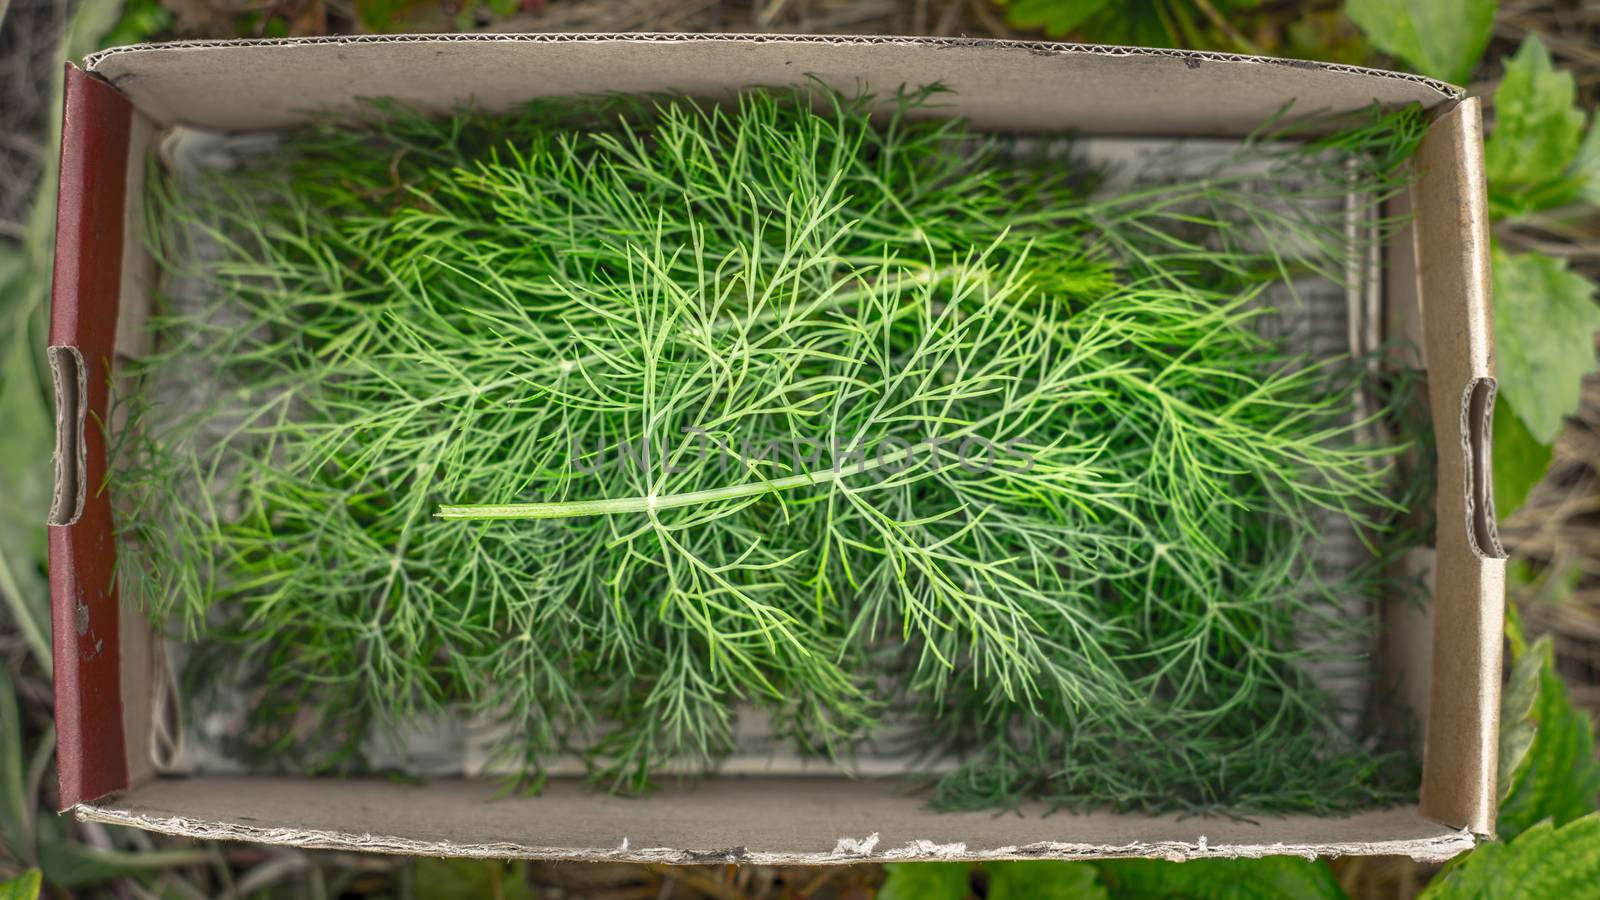 Dill in the box top view by Deniskarpenkov